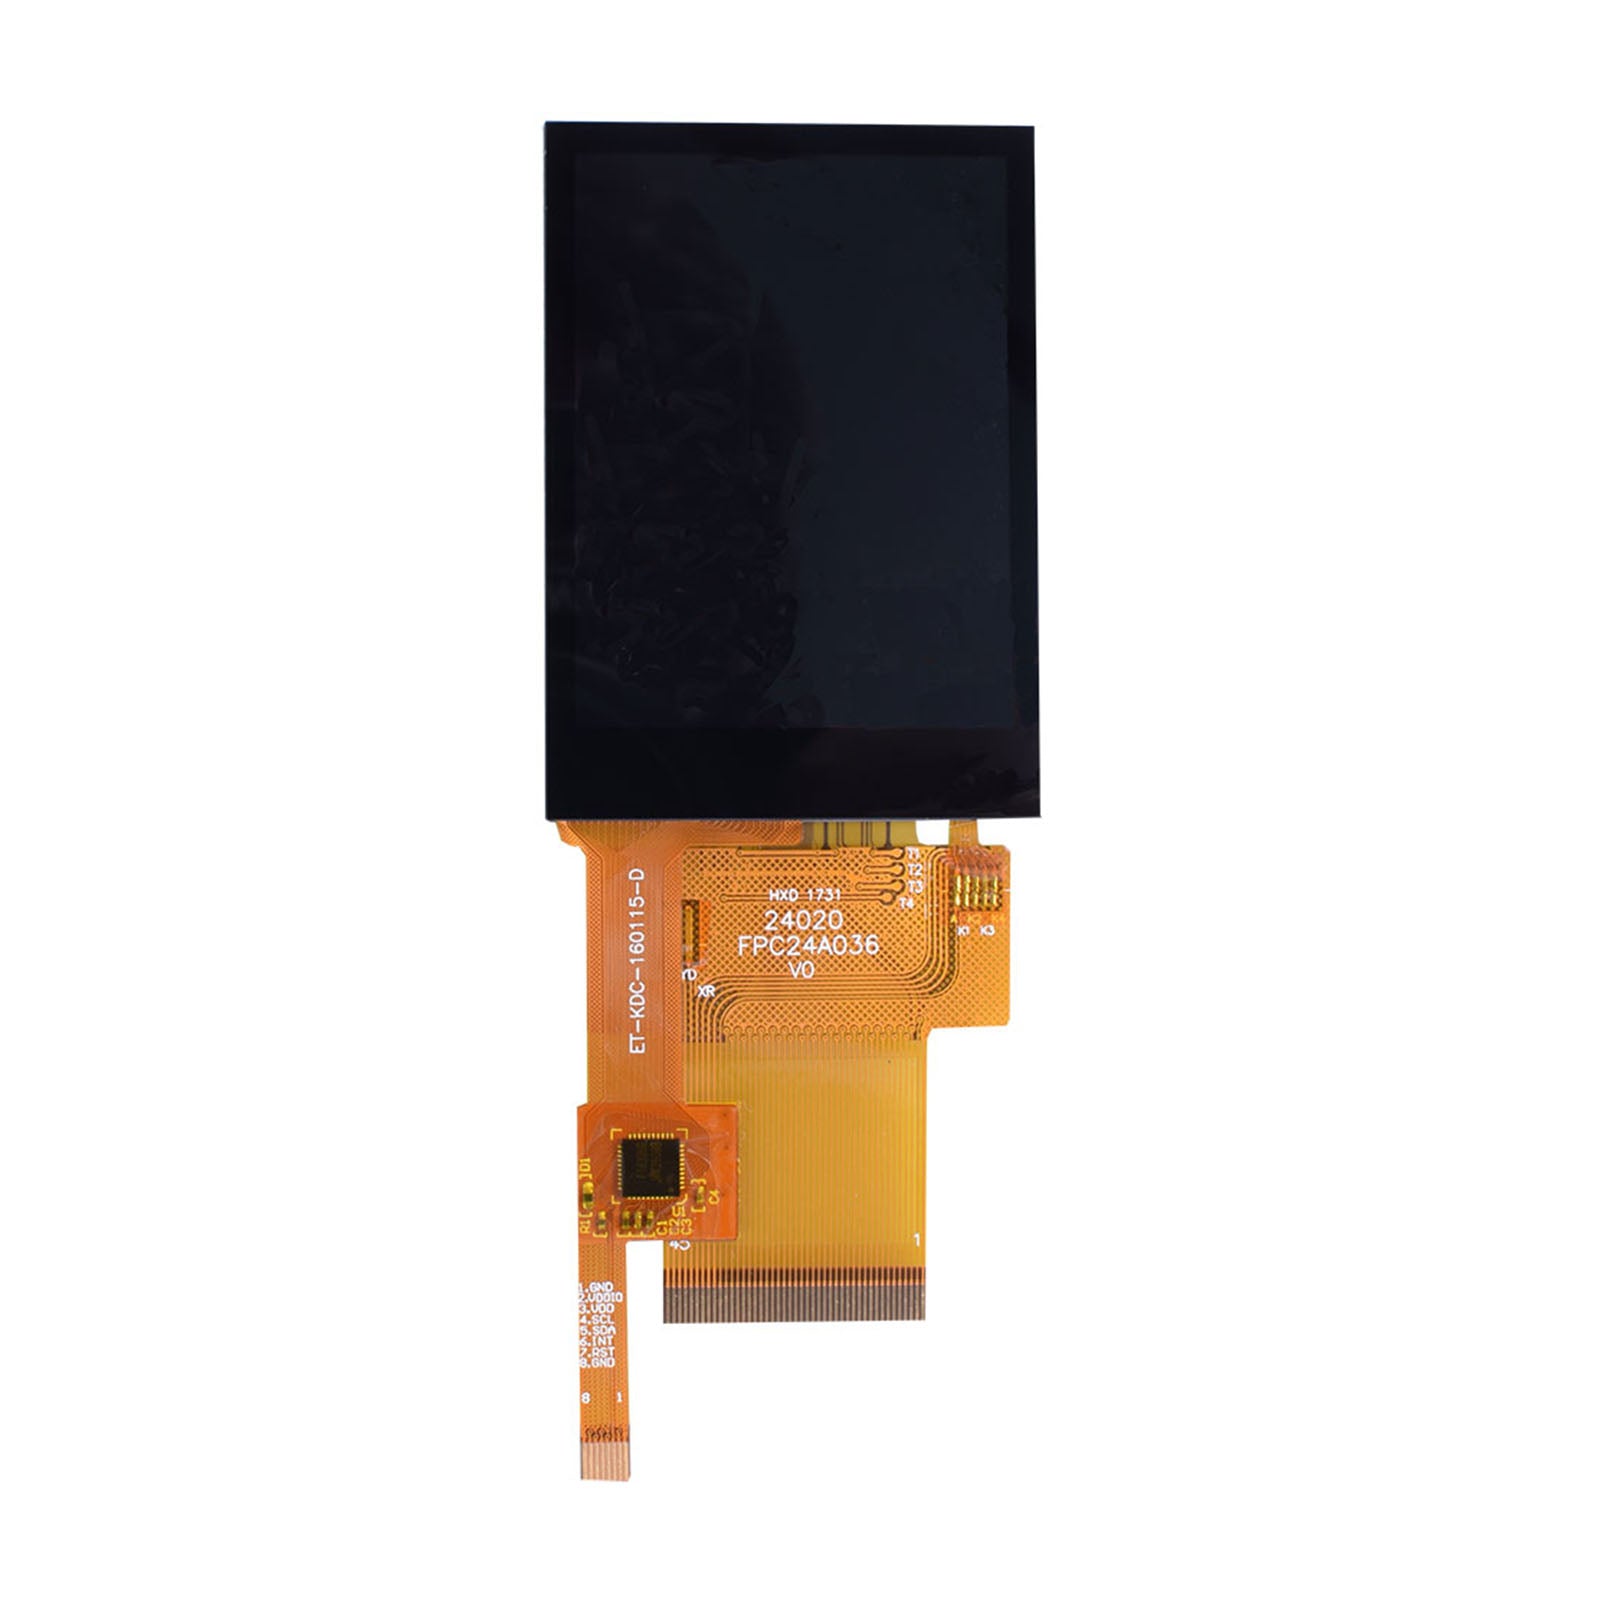 DisplayModule 2.4" IPS 240x320 TFT LCD Display Panel with Capacitive Touch - SPI, MCU, RGB